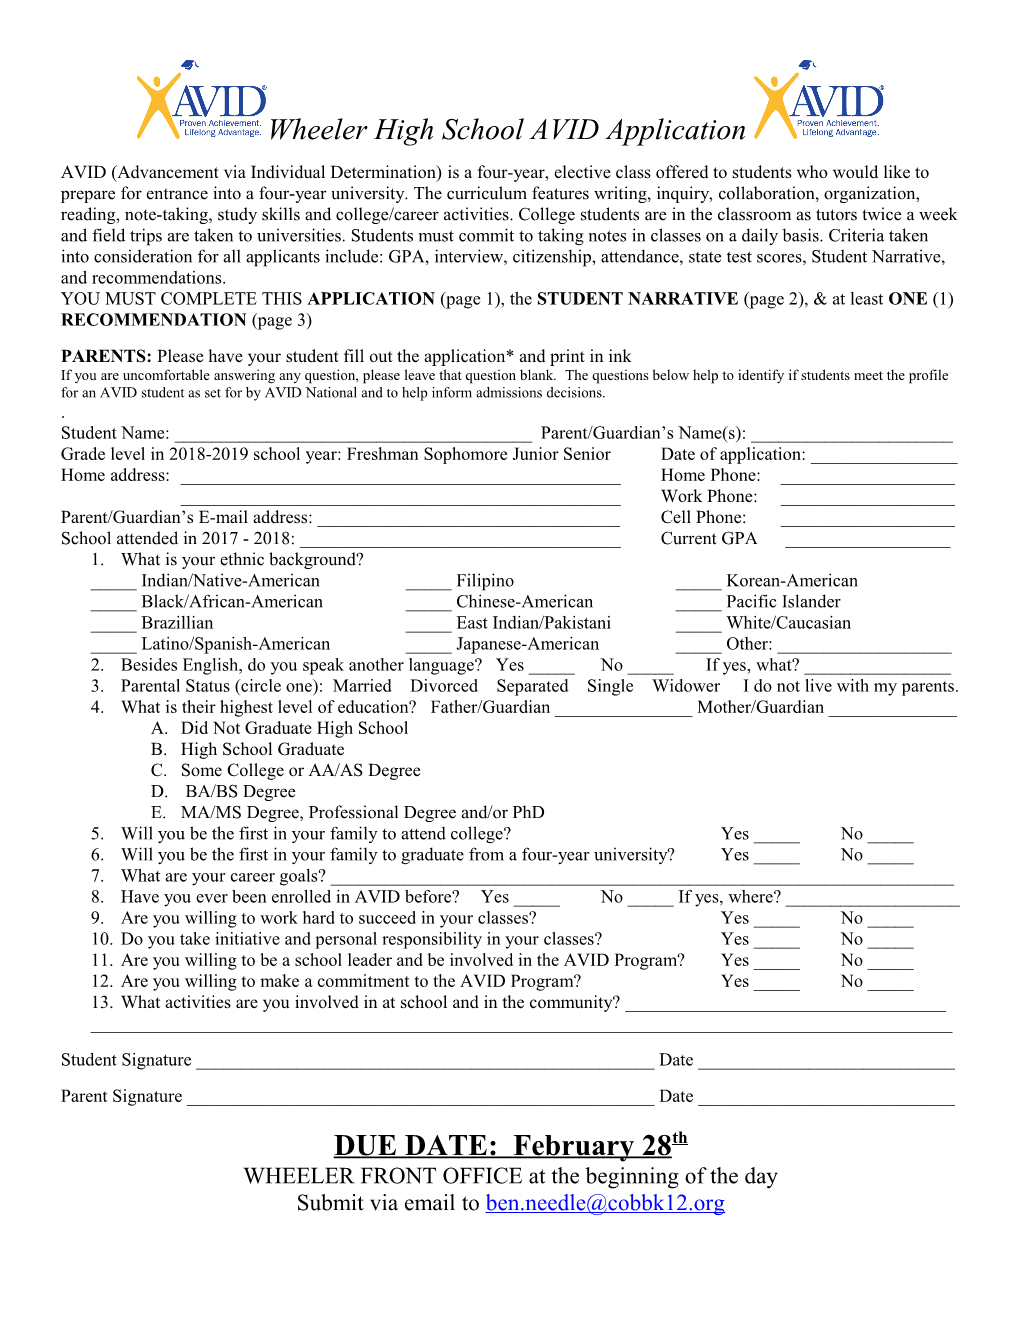 PARENTS: Please Have Your Student Fill out the Application* and Print in Ink